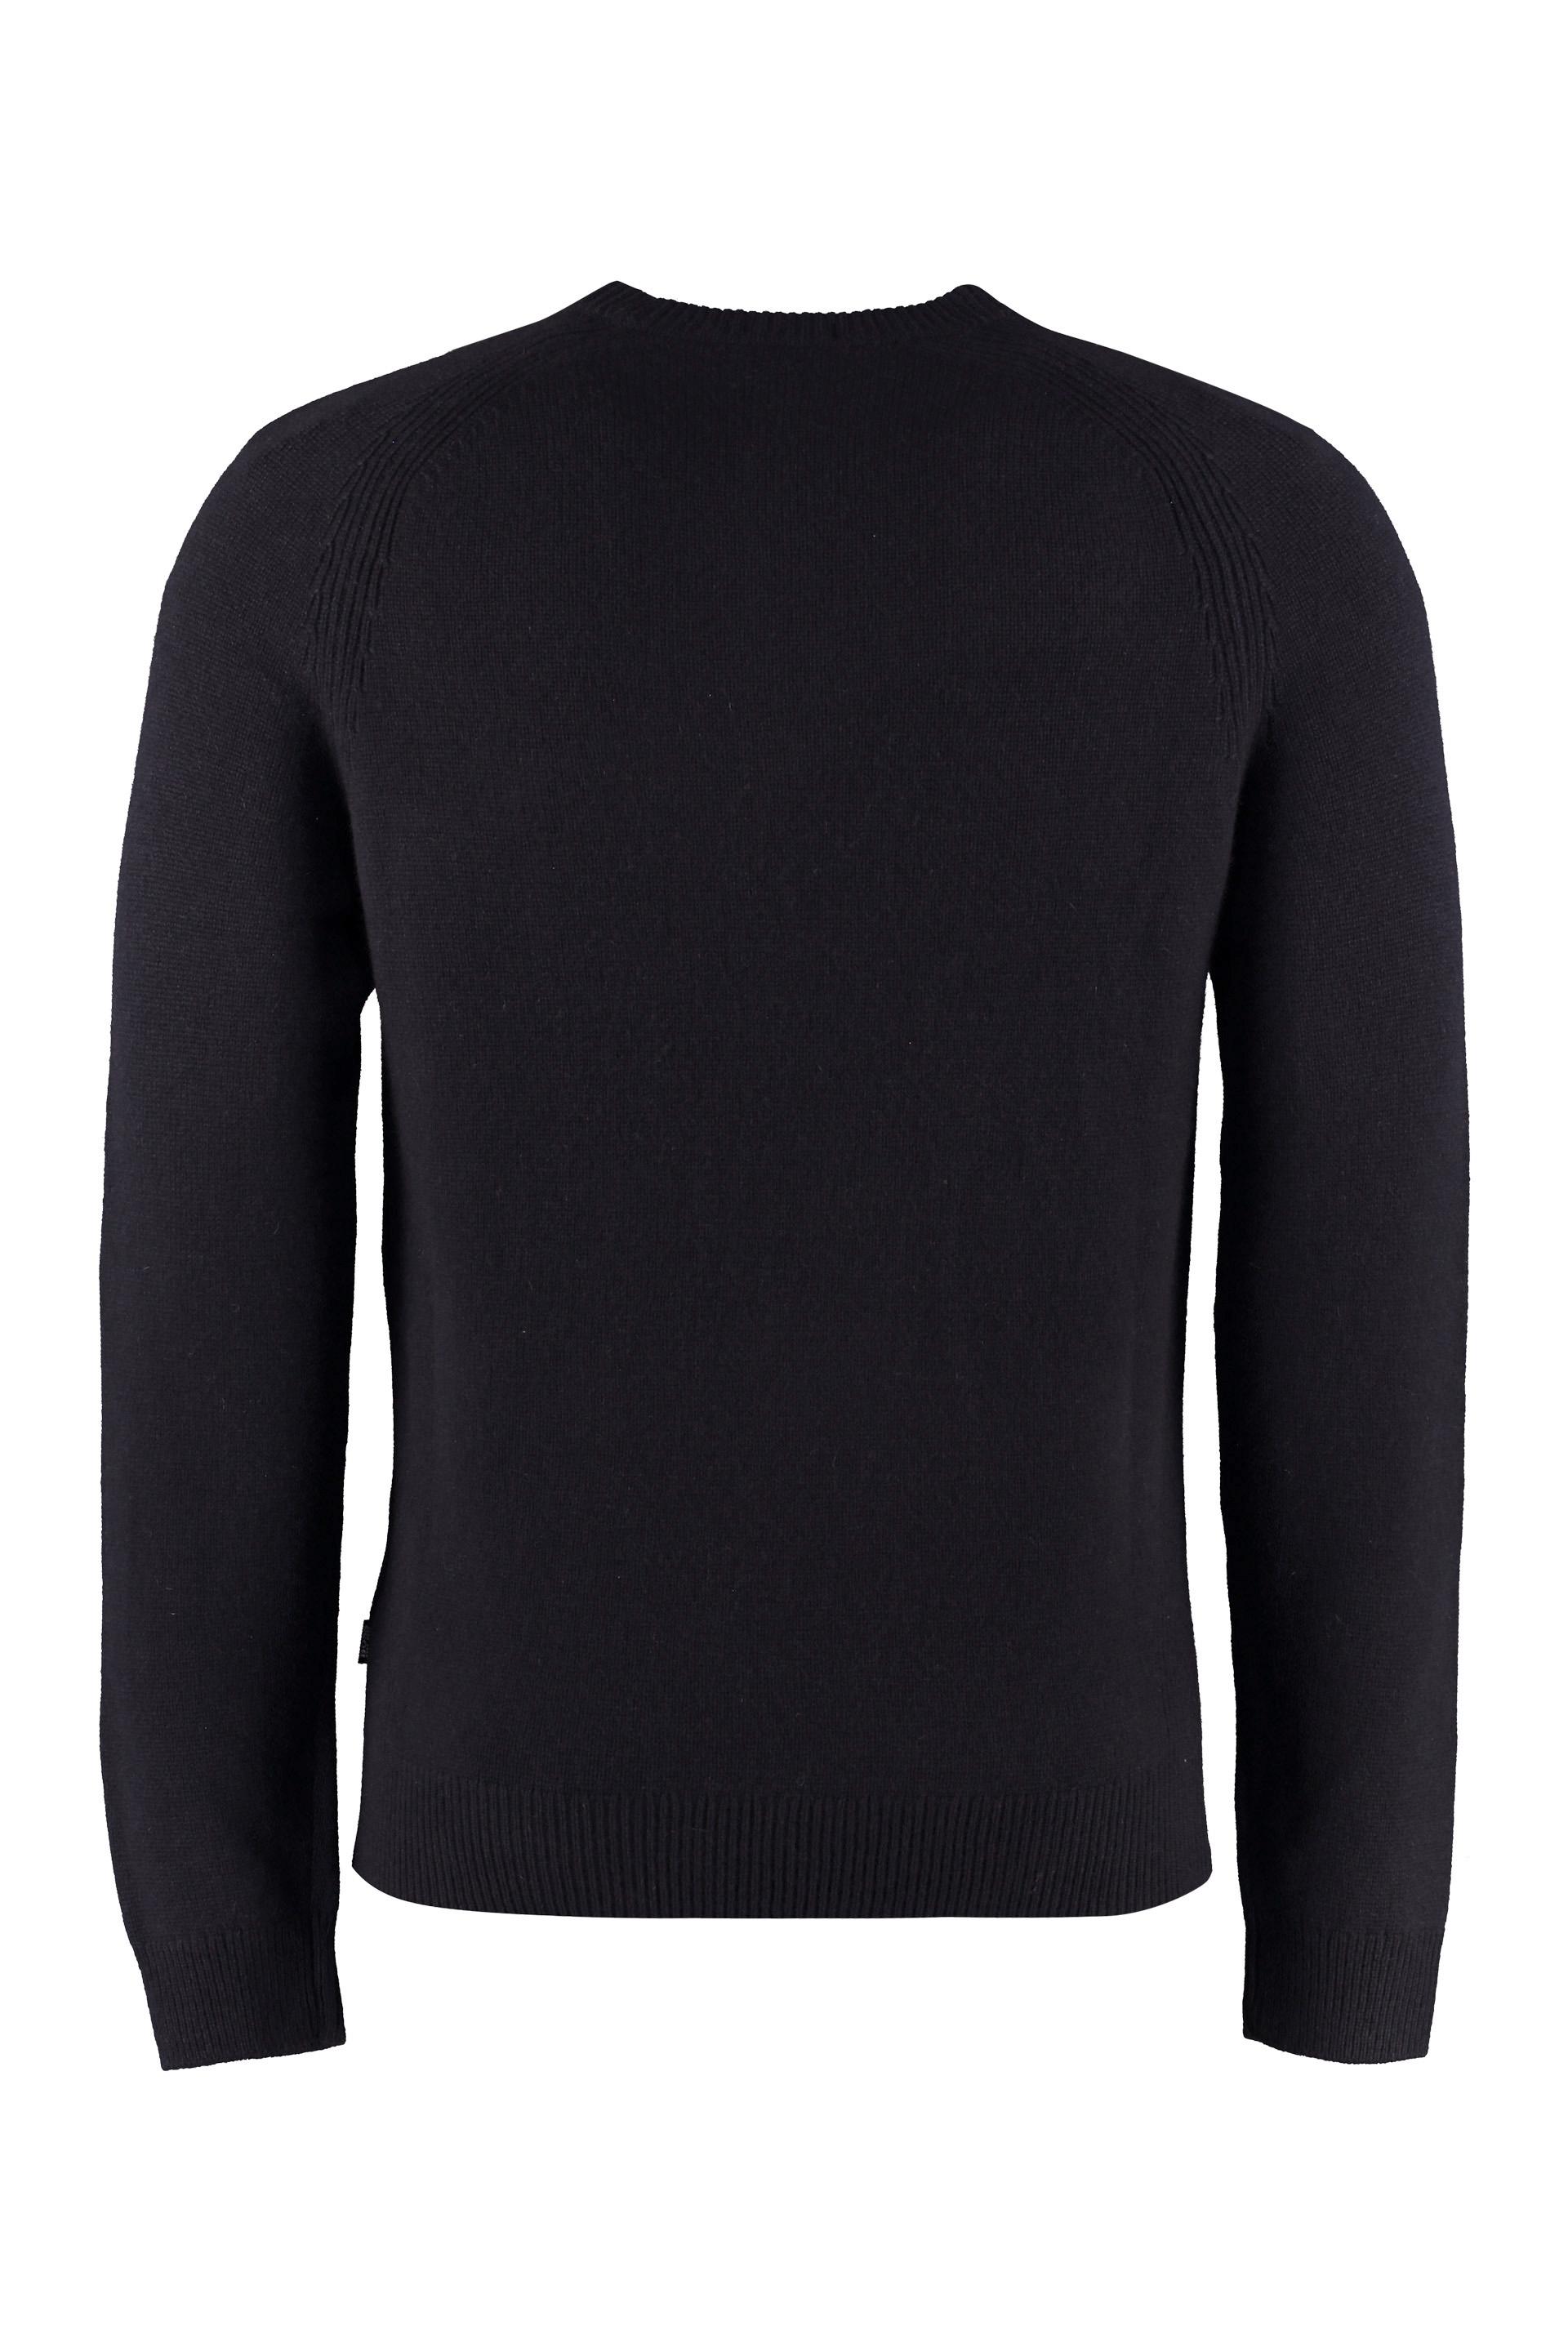 BOSS by Hugo Boss Cashmere Crew-neck Pullover in Blue for Men - Lyst